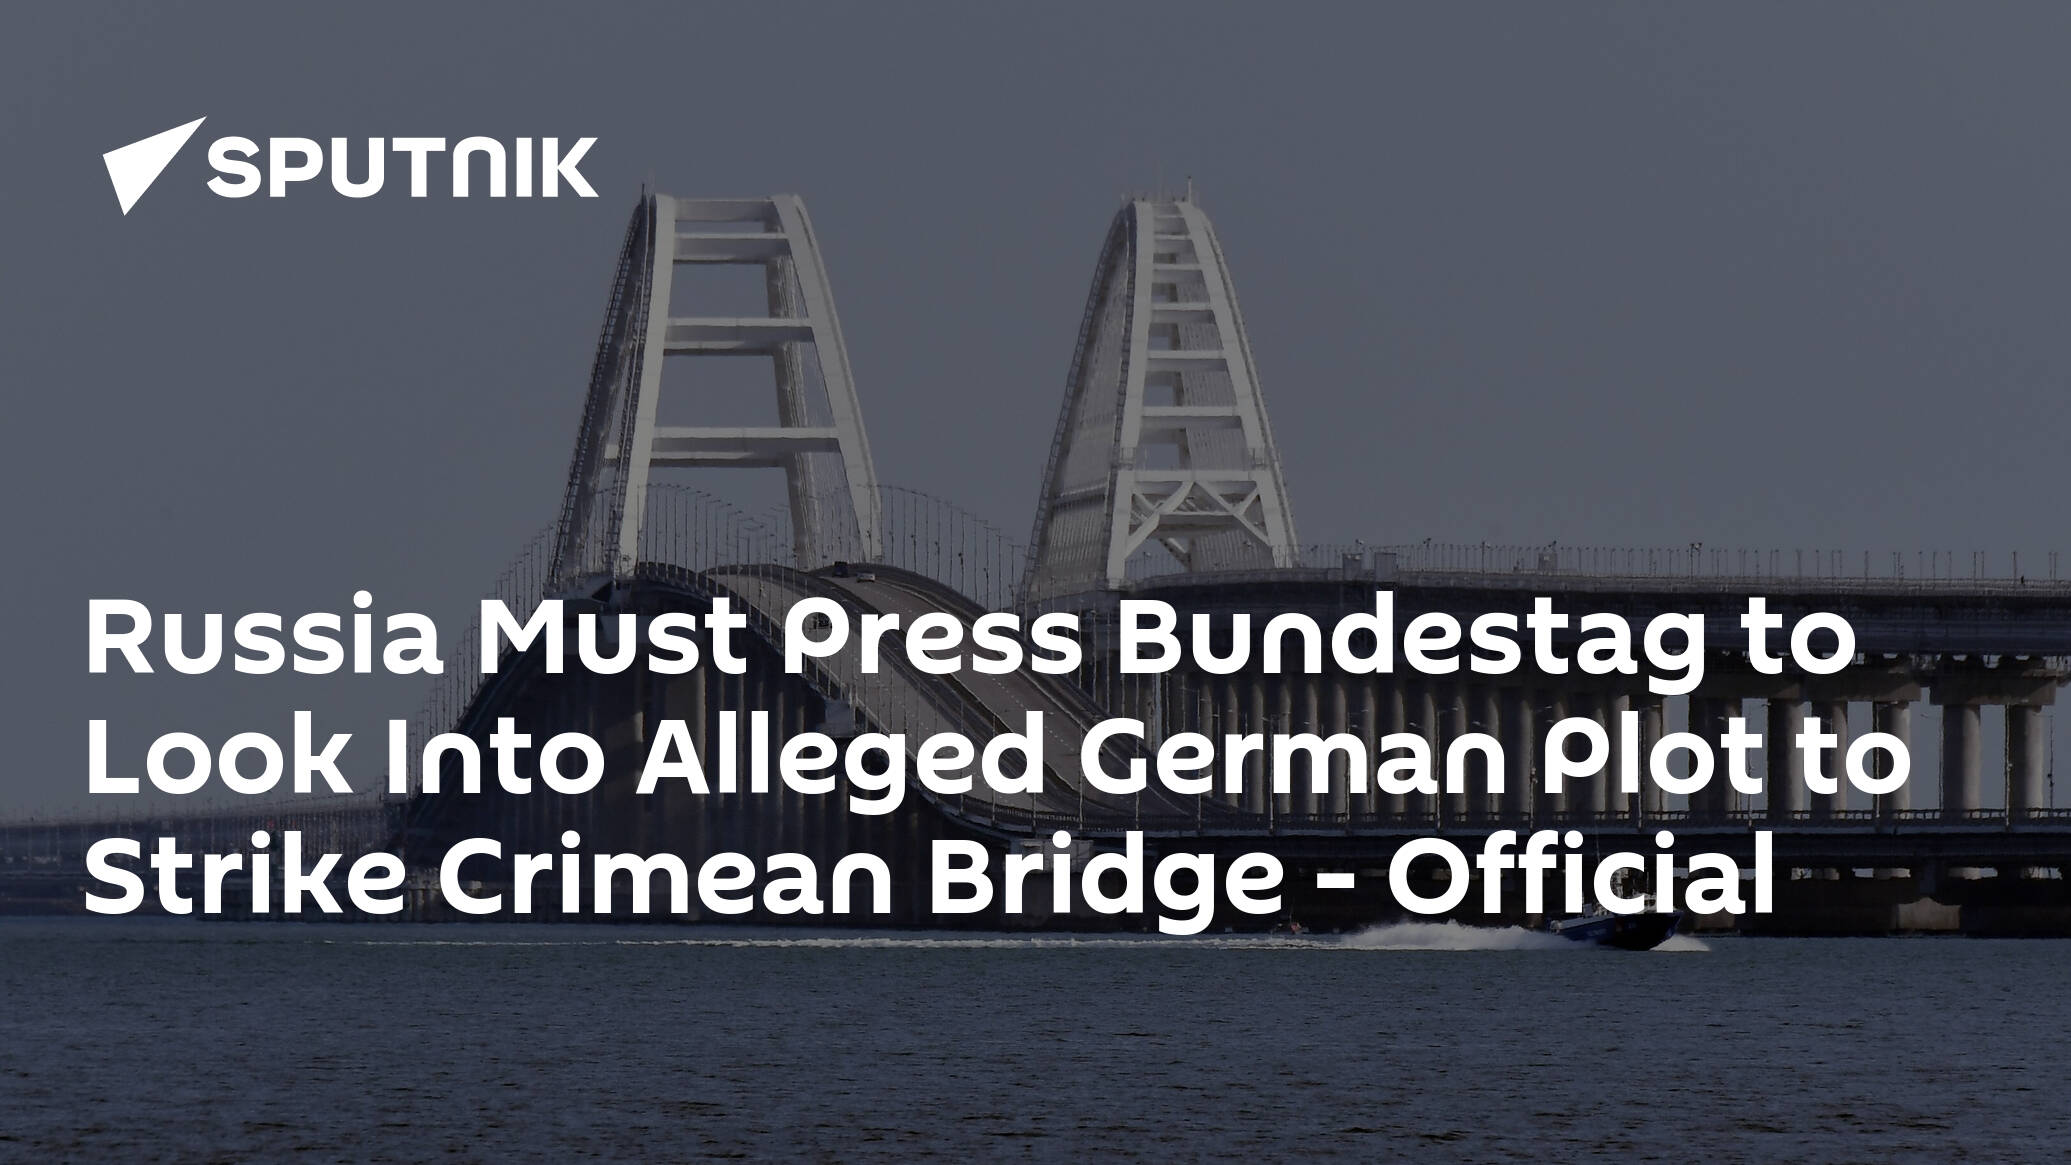 Russia Has to Call for Bundestag Probe Into Alleged German Plot to Strike Crimean Bridge – Official